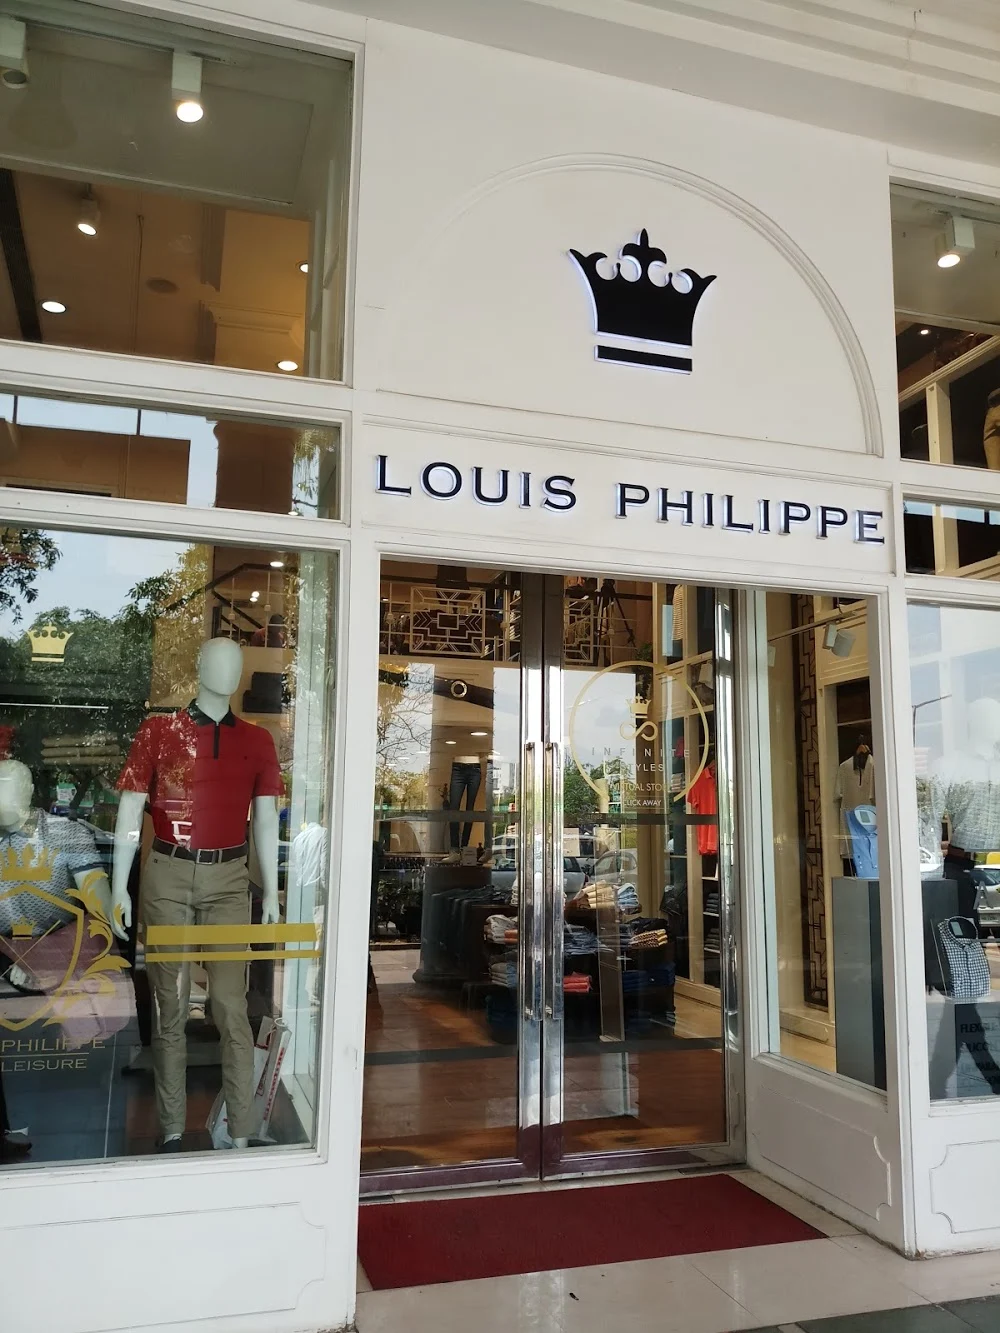 The inside look of Louis Philippe store.